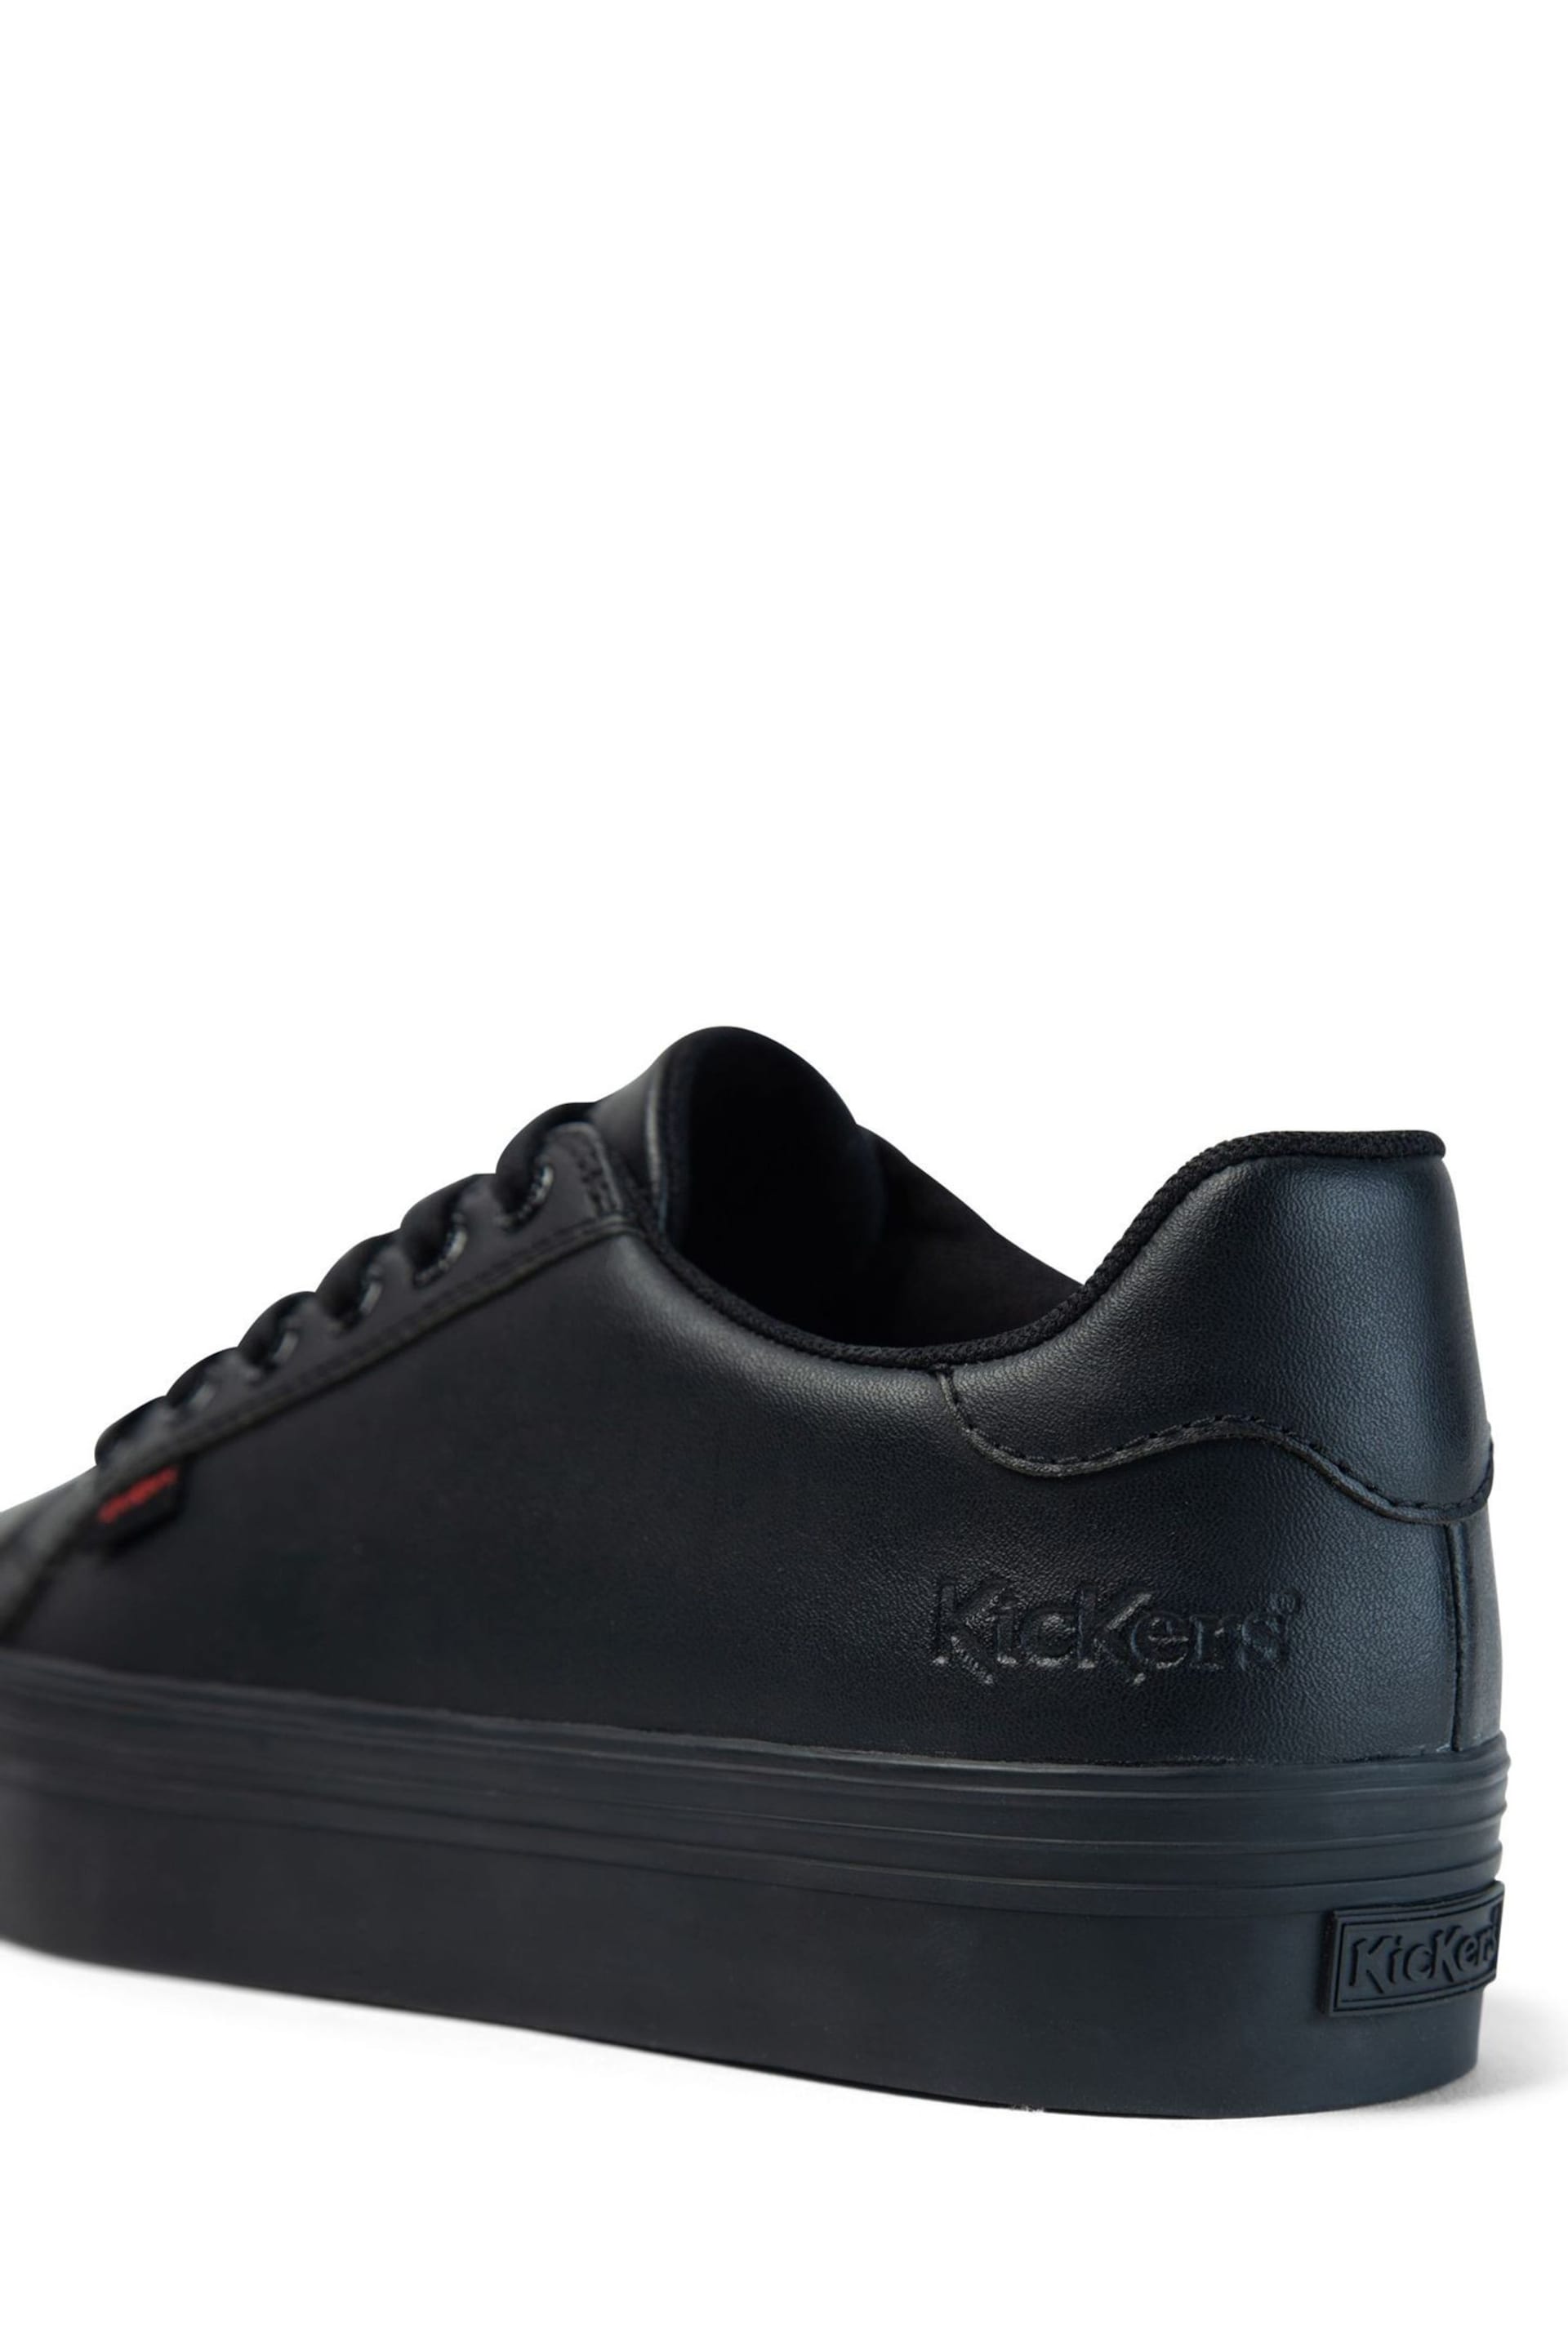 Kickers Womens Black Tovni Stack Leather Shoes - Image 12 of 17